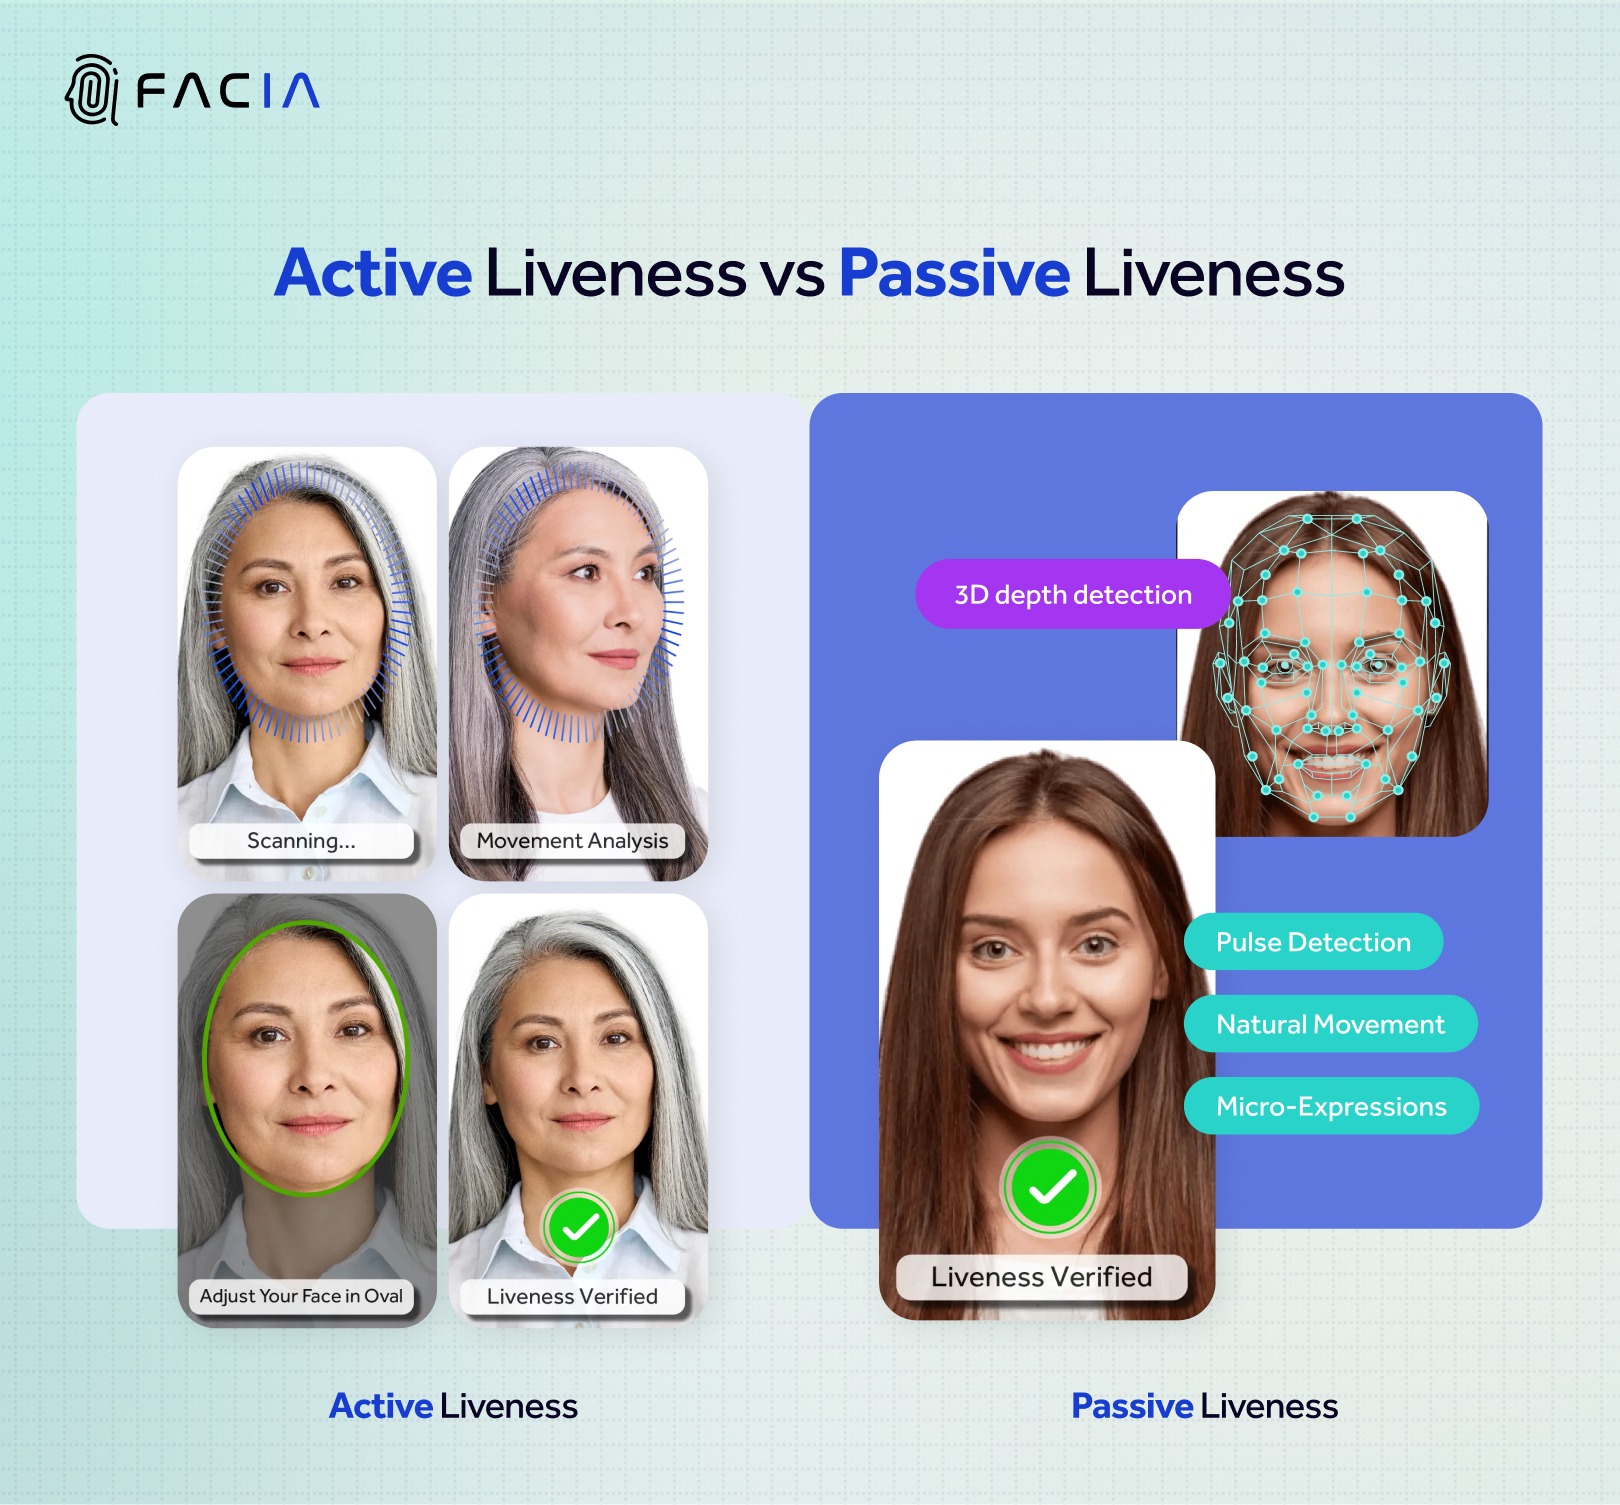 It is a visual illustration of the difference between Active Liveness and Passive Liveness in facial recognition.